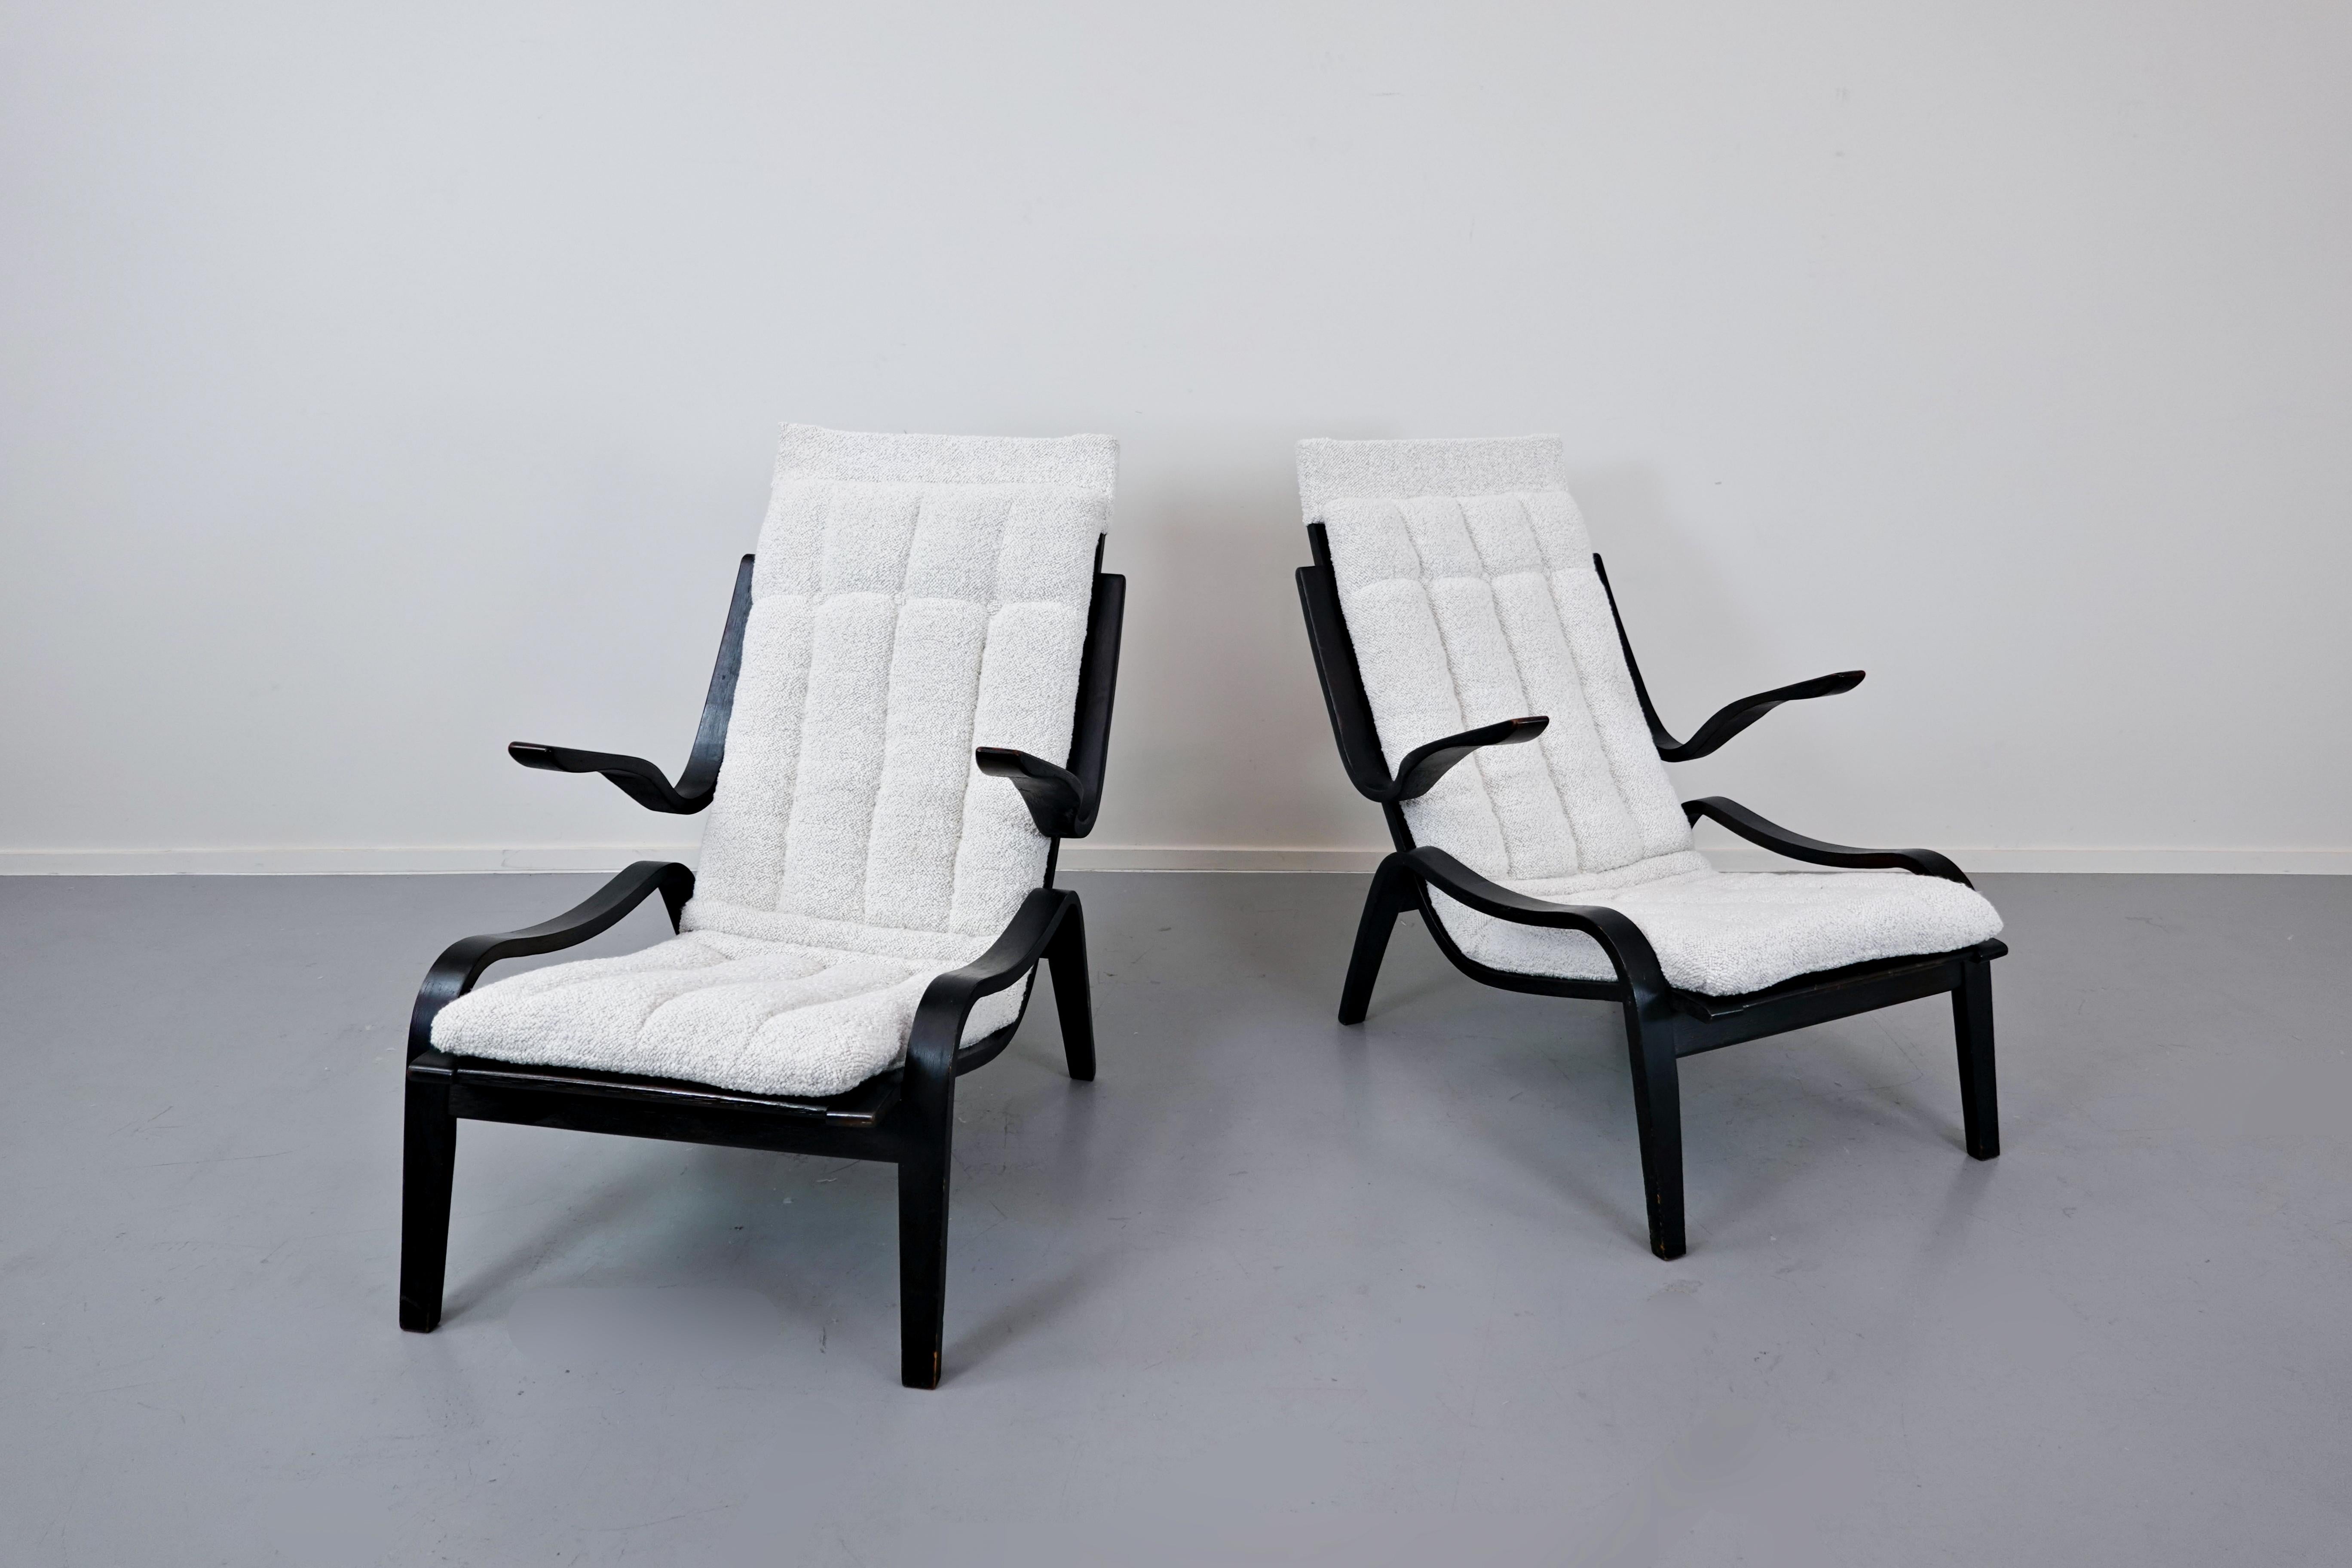 Pair of bentwood armchairs by Jan Vanek for UP Zavodny, 1930s.